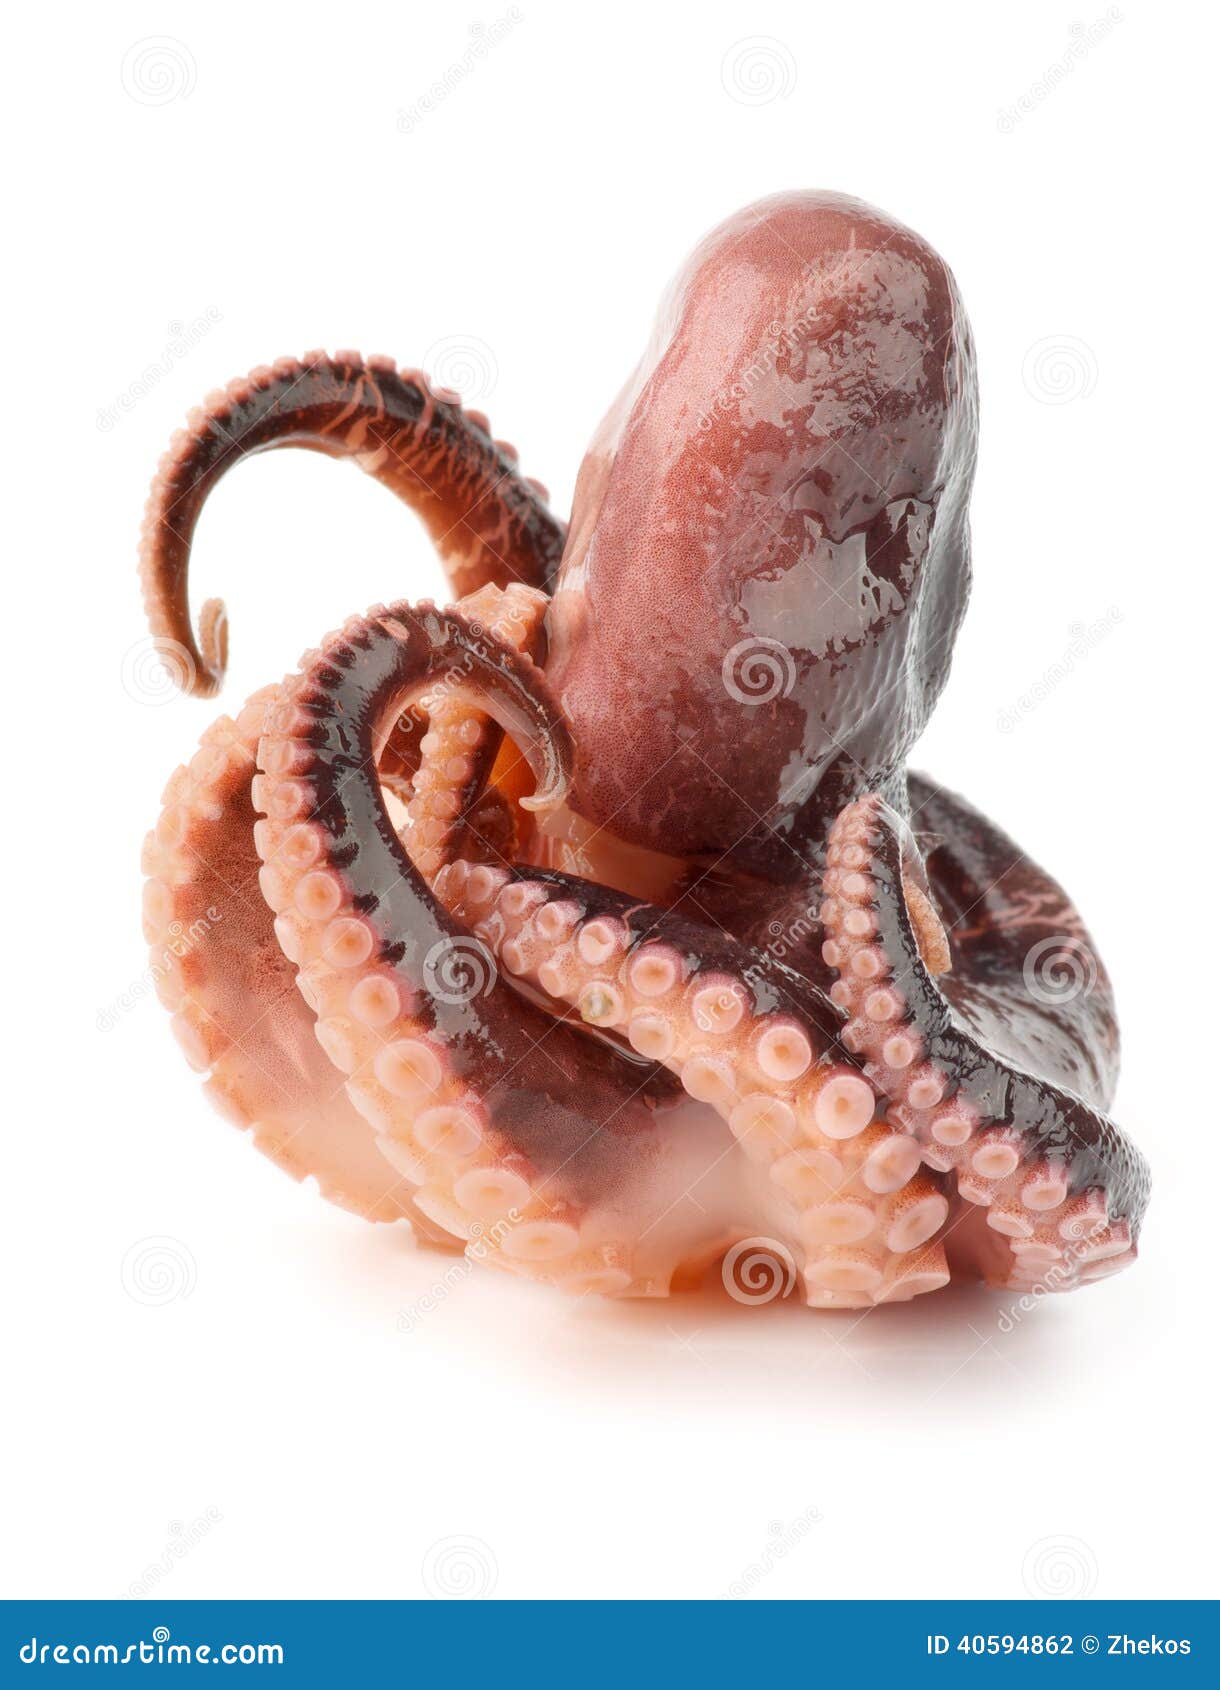 Octopus stock photo. Image of ready, eating, appetizer - 40594862